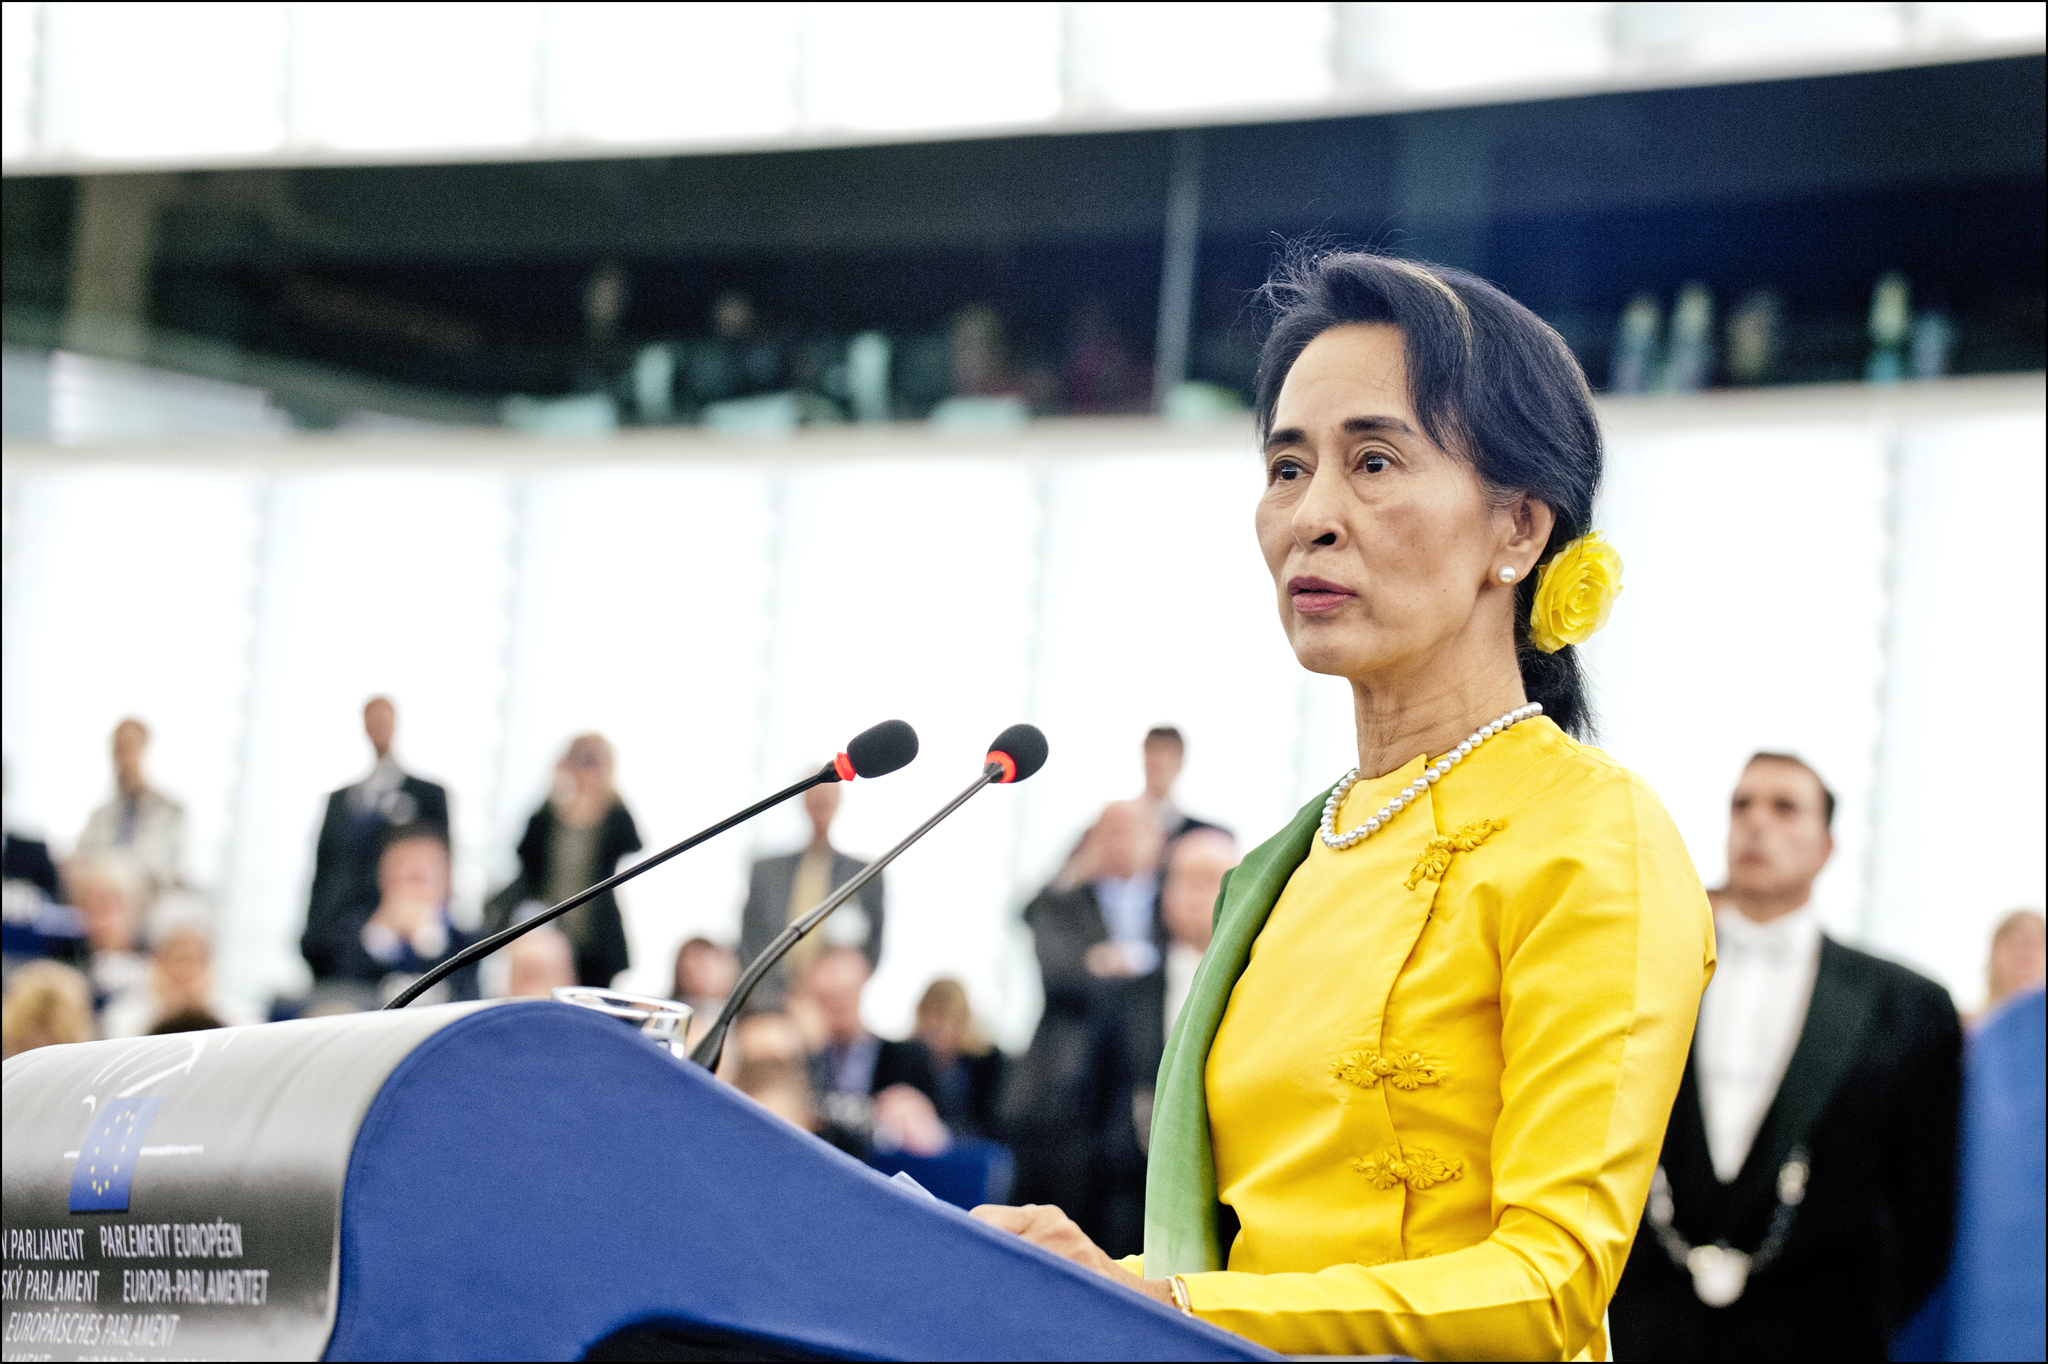 Index condemns the conviction of Myanmar leader Aung San Suu Kyi